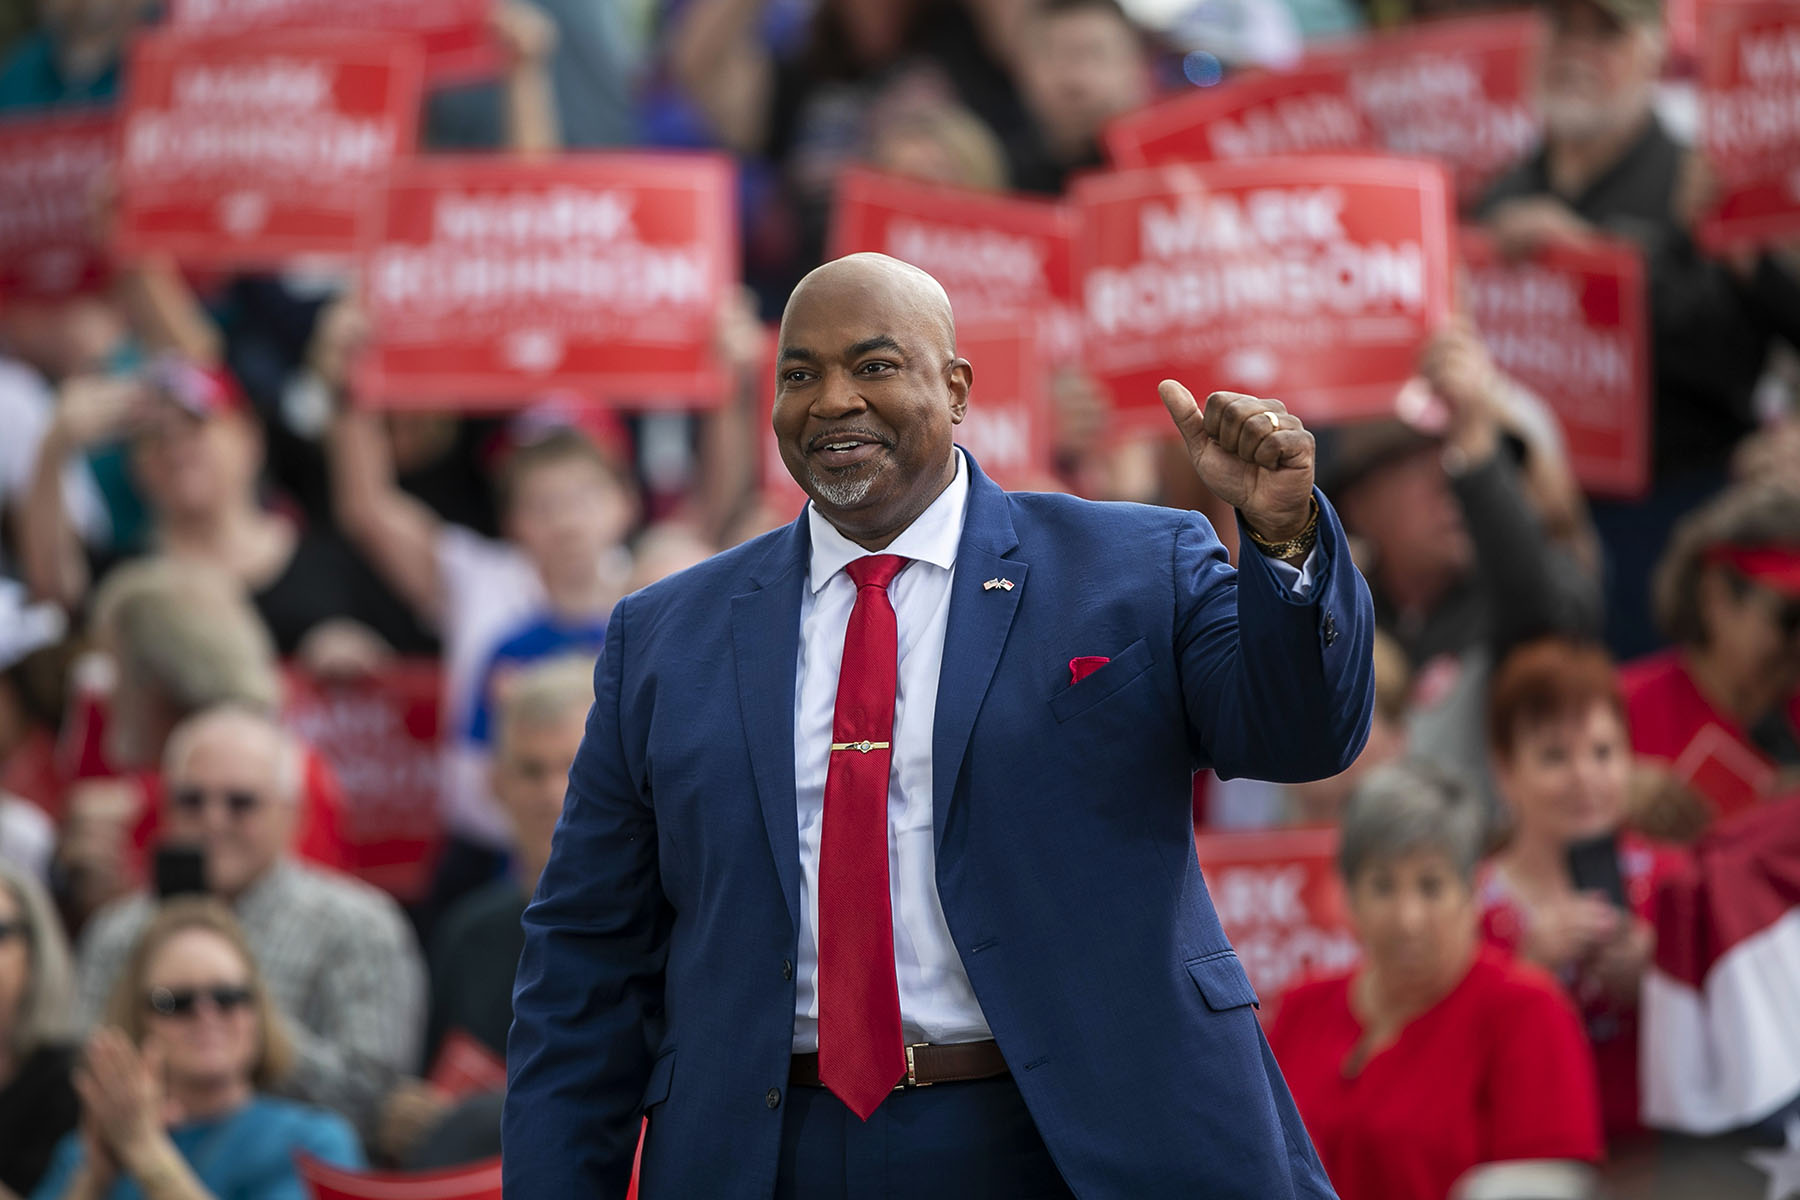 Lt. Gov. Mark Robinson waves at a crowd during a rally.